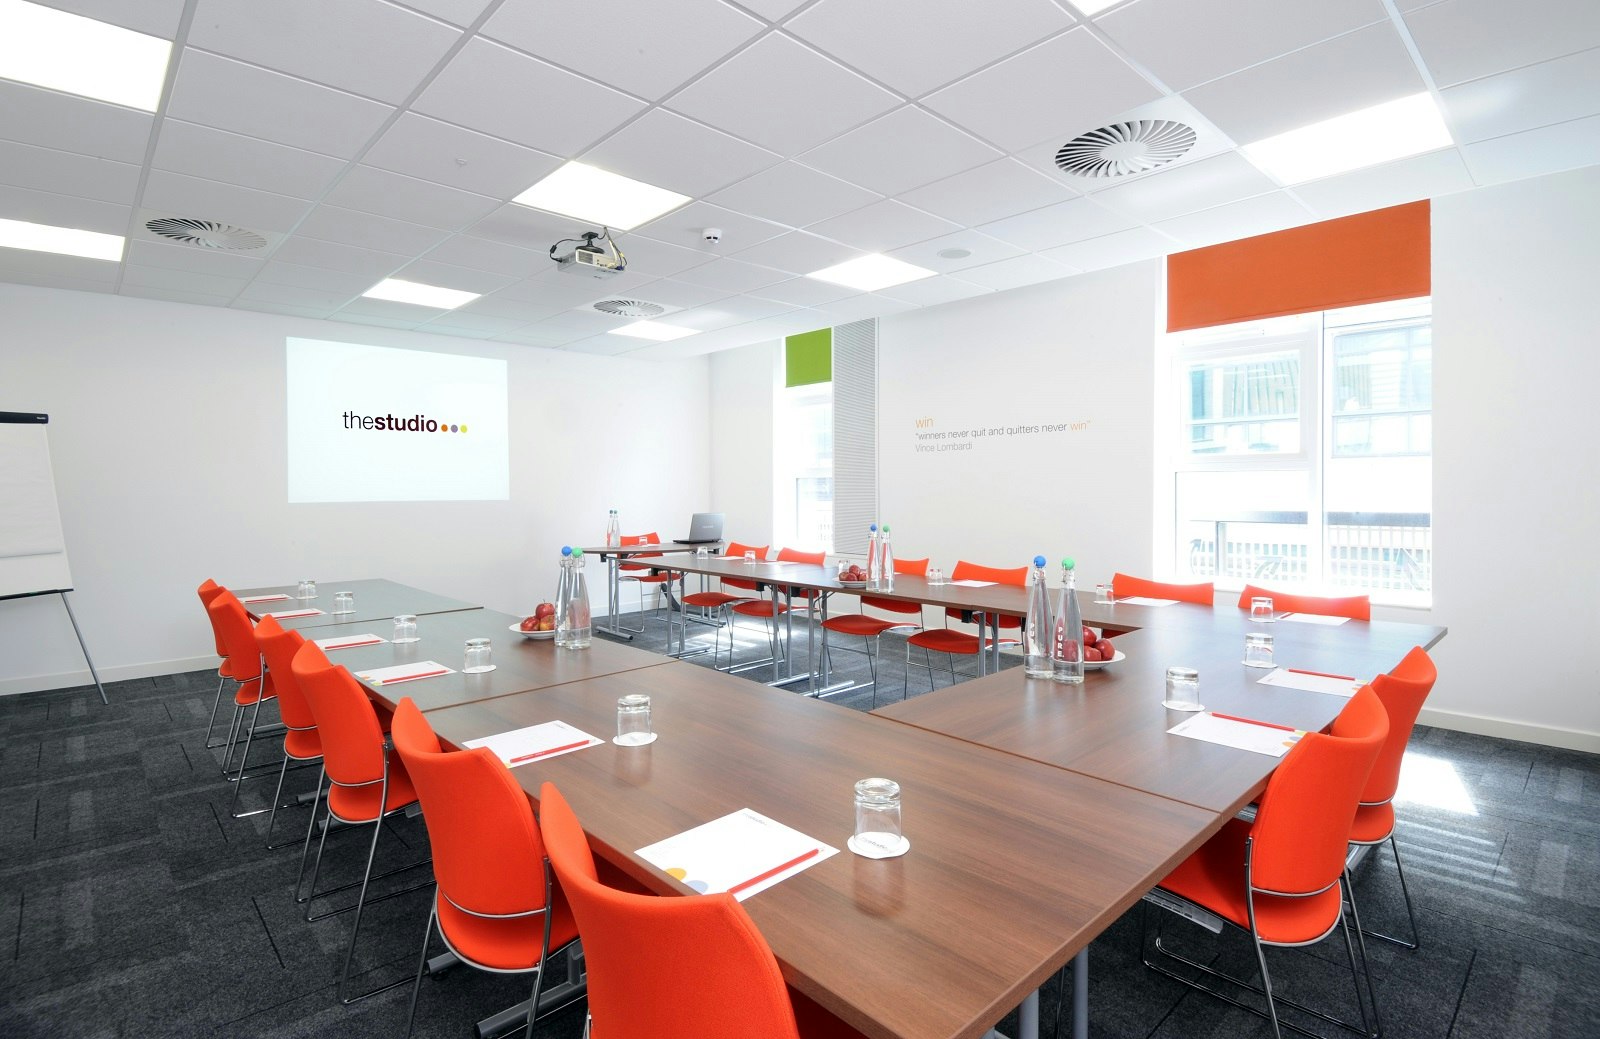 Team Building Venues in Manchester - thestudio Manchester